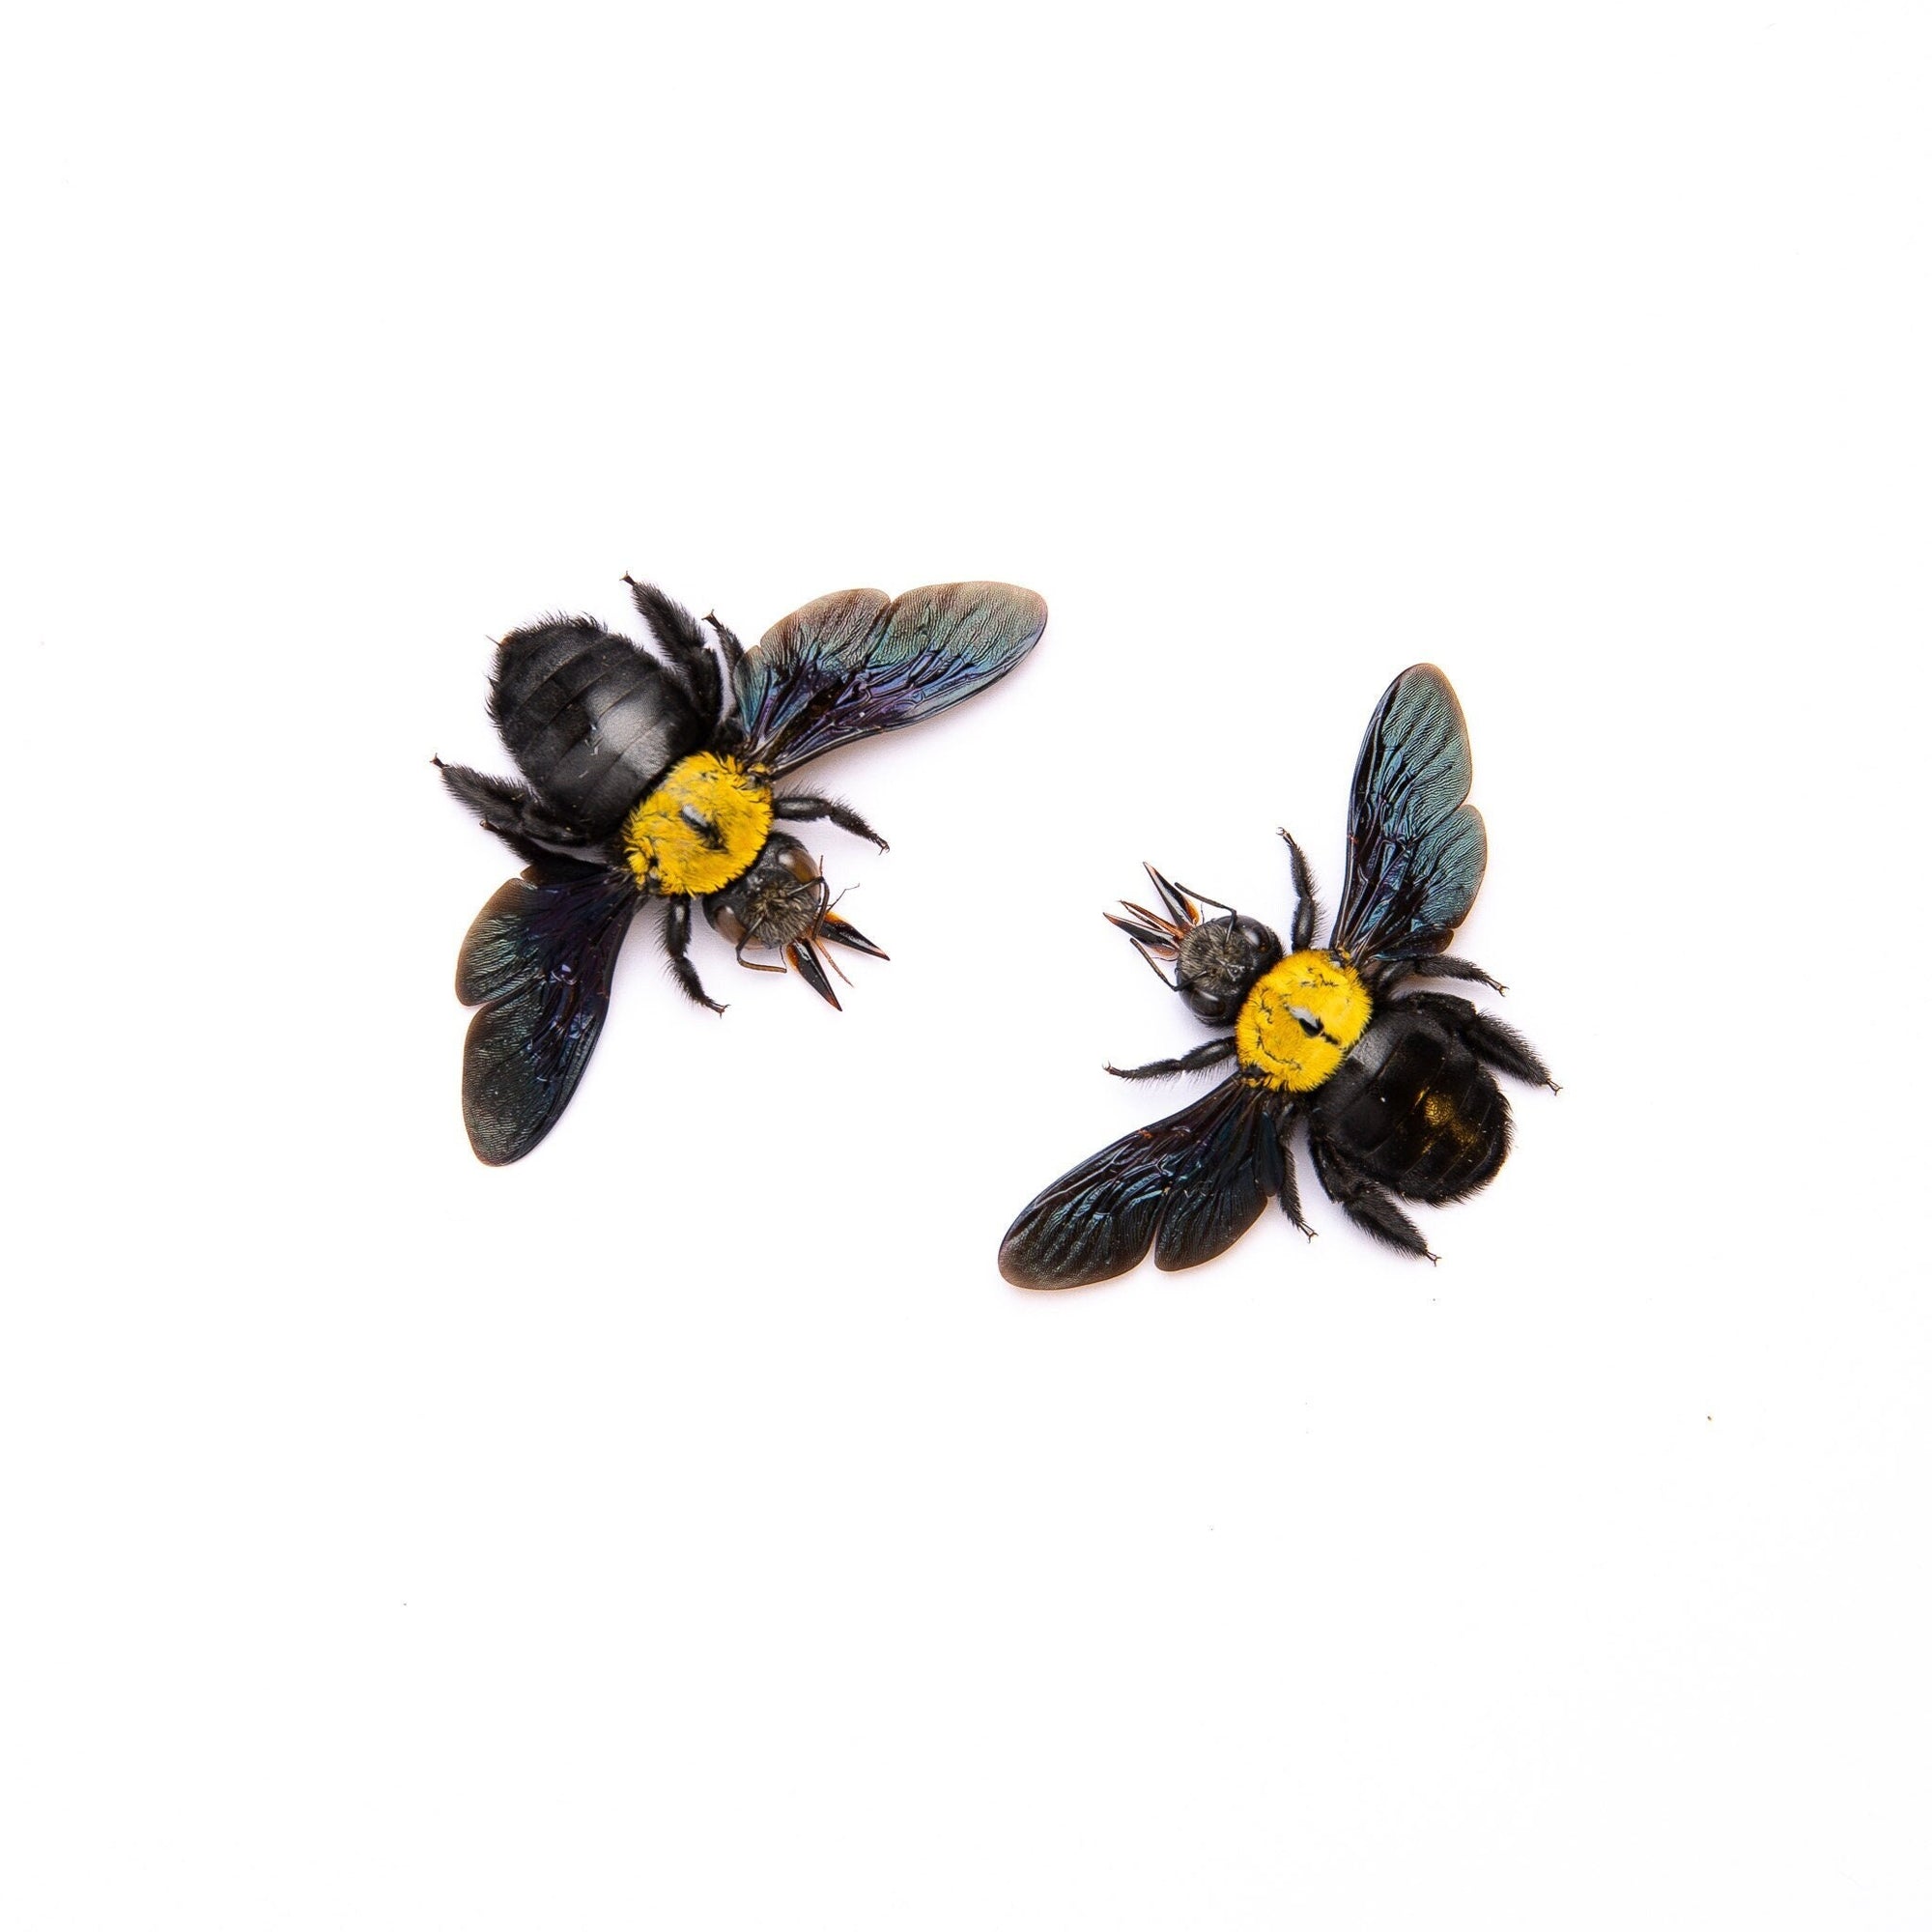 TWO (2) Yellow Carpenter Bees (Xylocopa aestuans) | A1 Spread Specimens | Dry-preserved Taxidermy